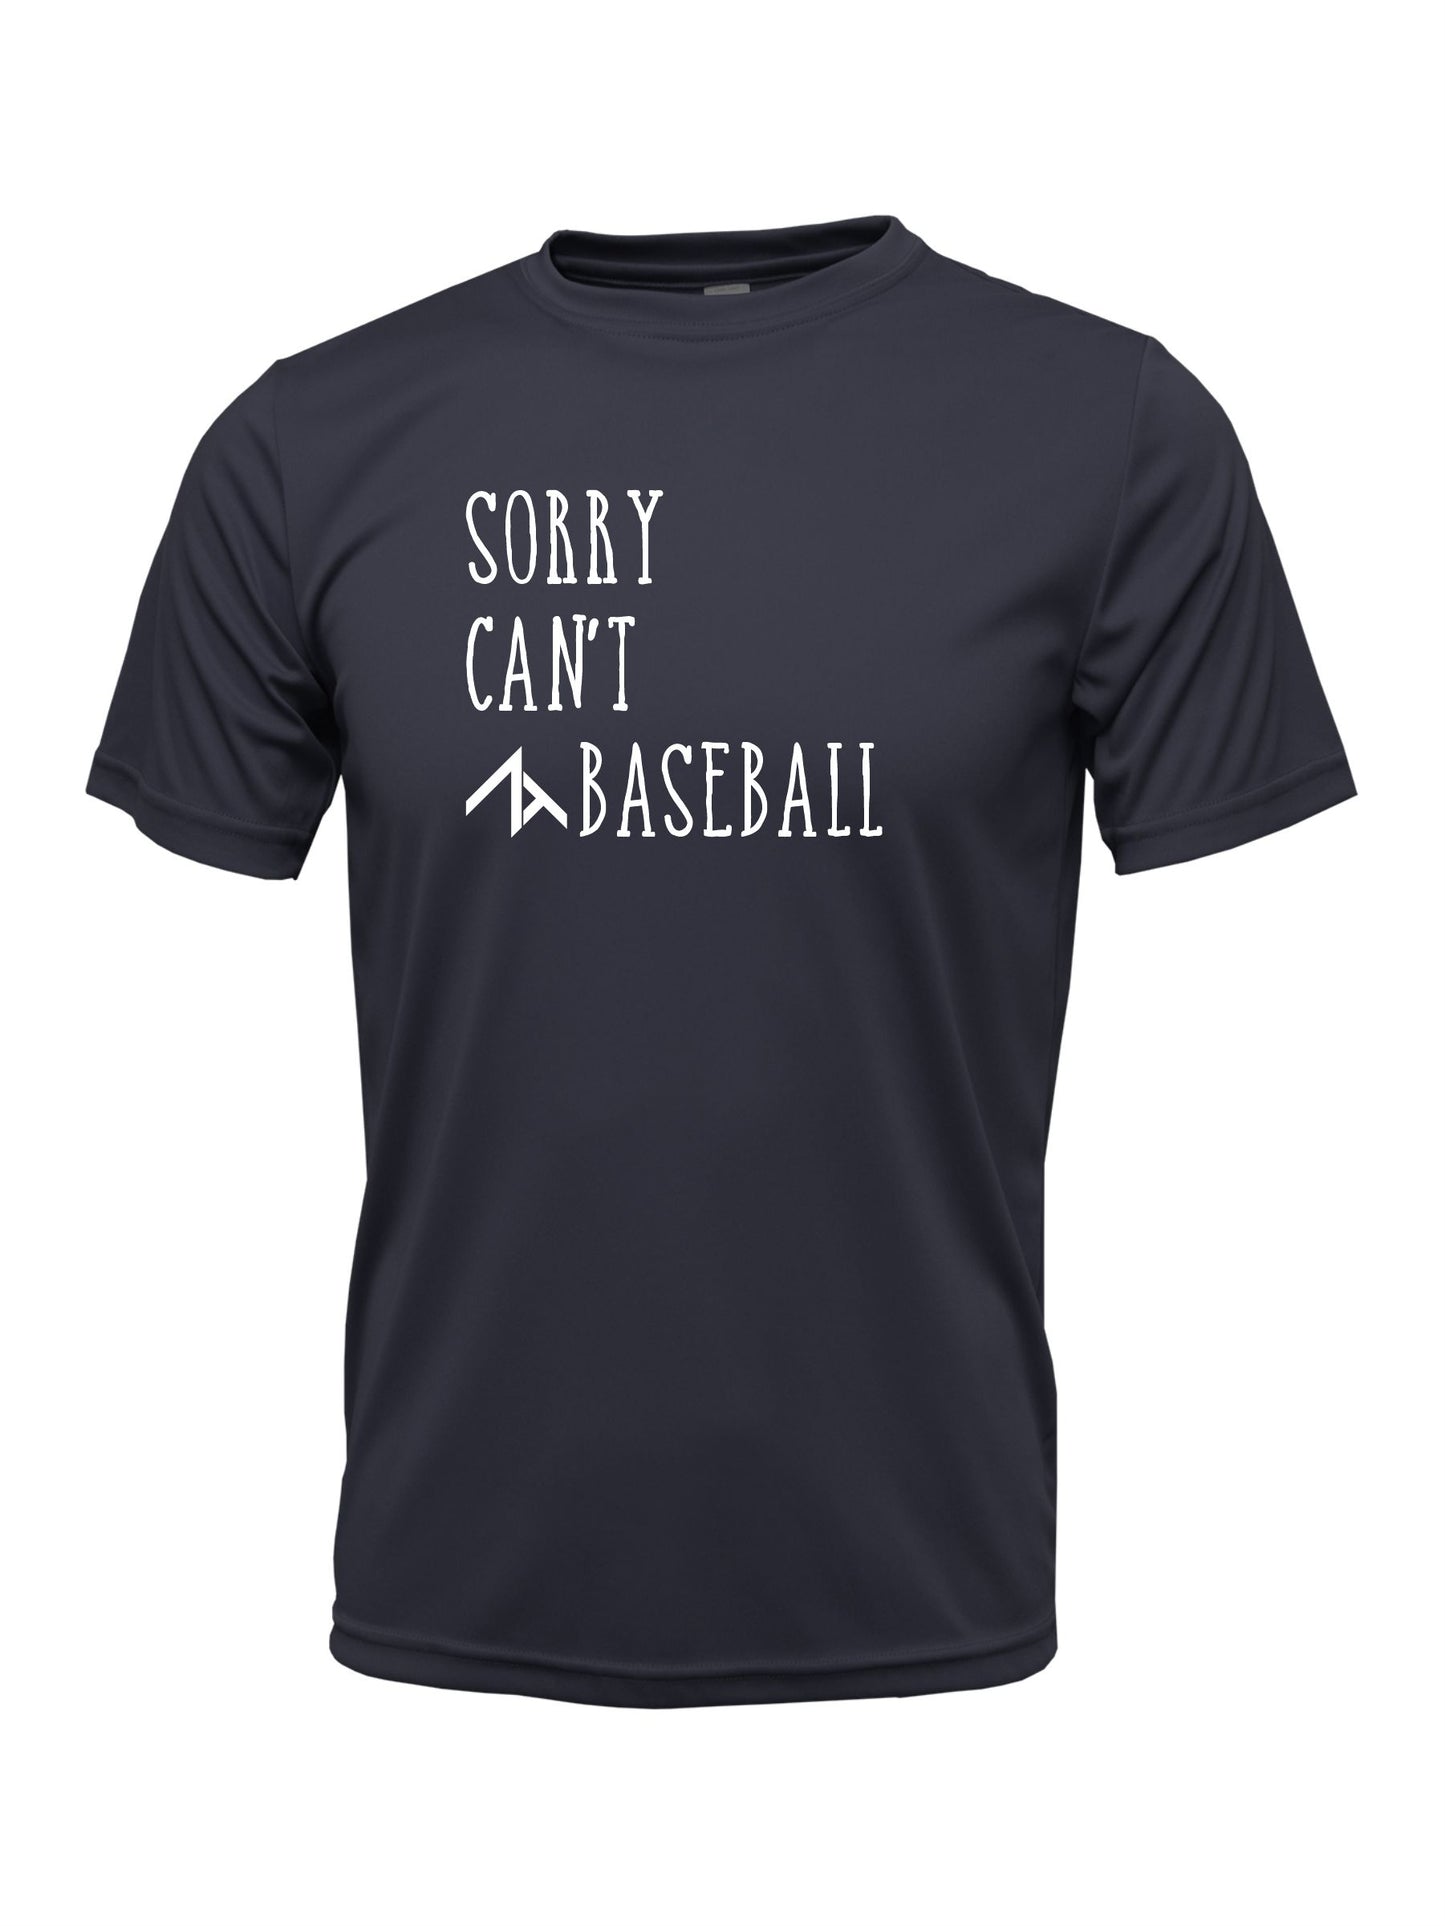 Short Sleeve "SORRY CAN'T" Dri-Fit T-shirt